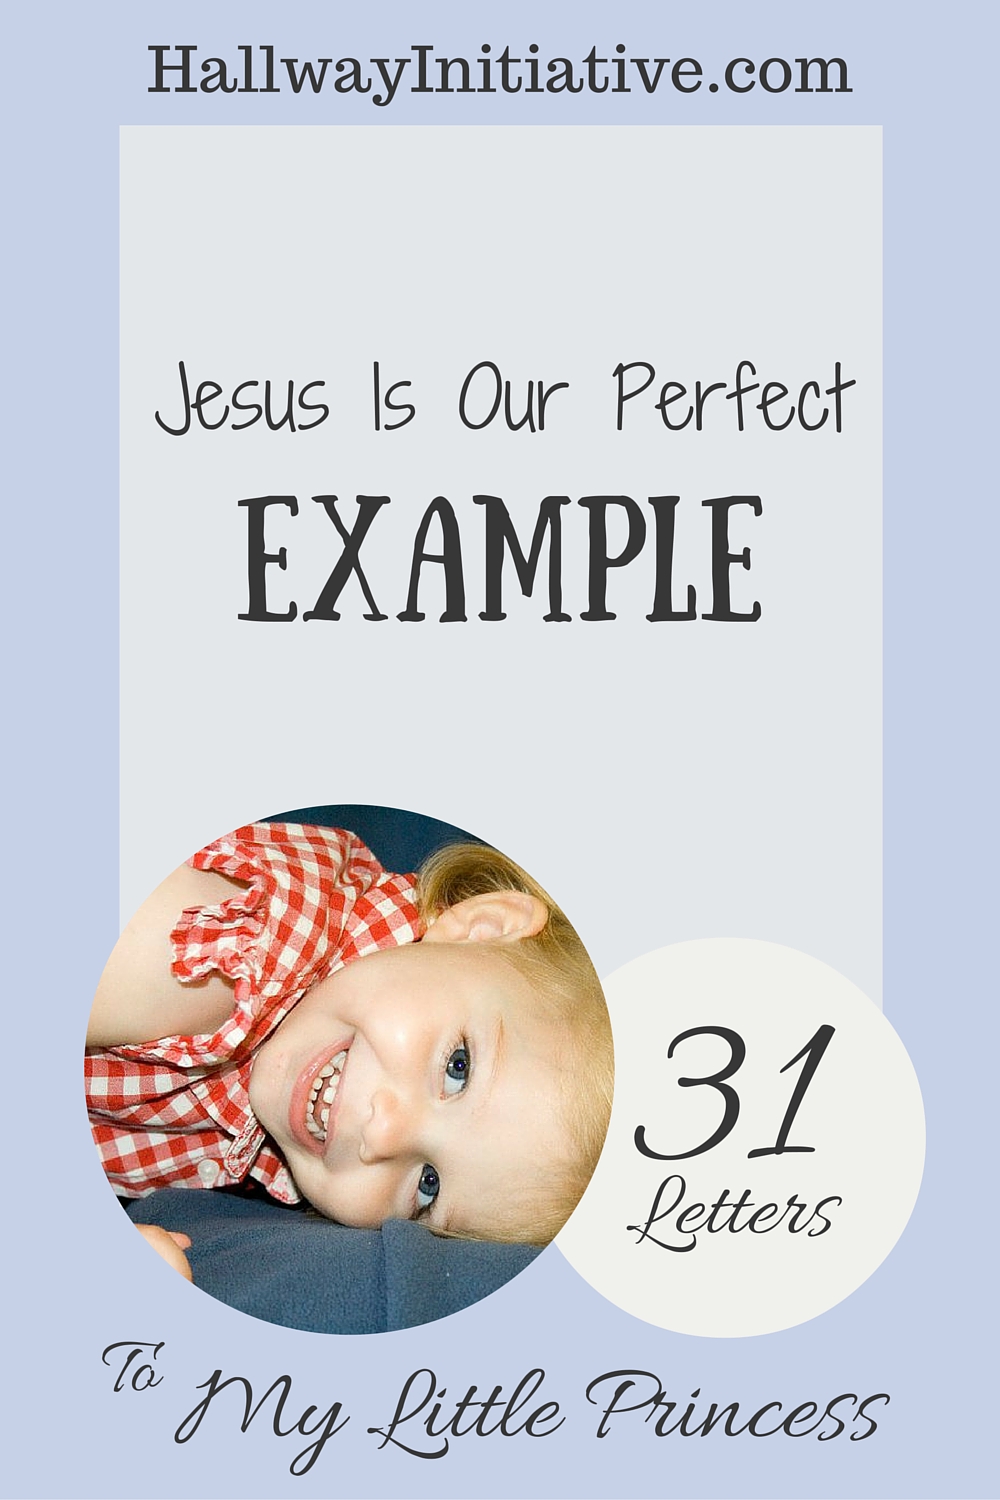 Jesus is our perfect example